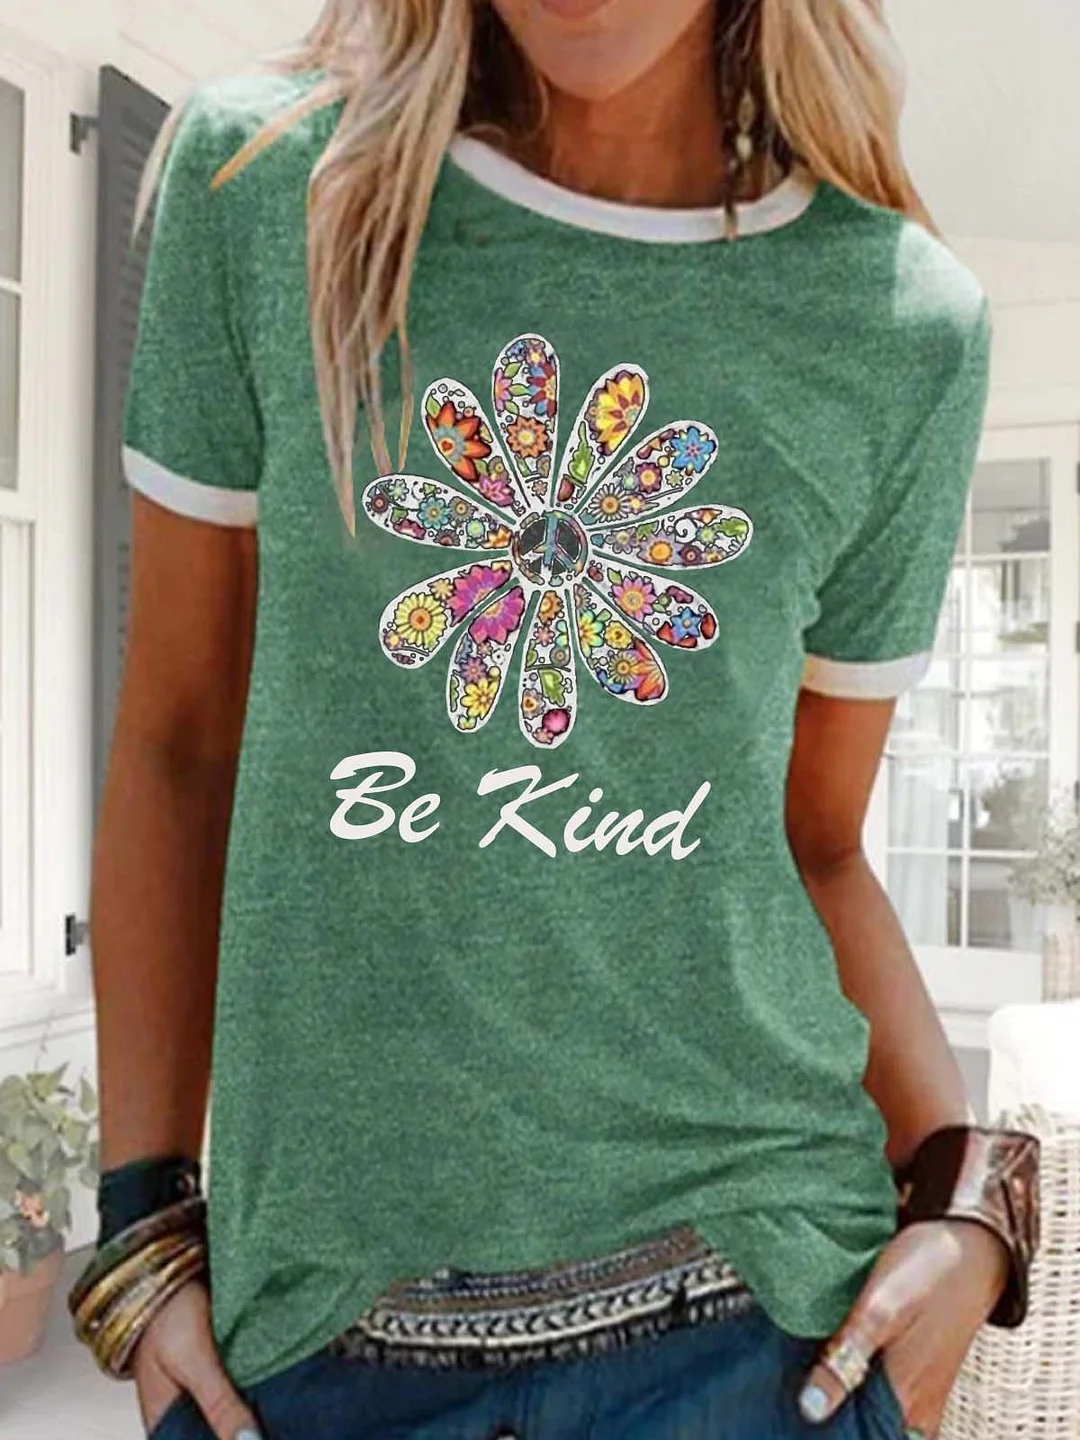 Floral  Short Sleeve  Printed  Cotton-blend  Crew Neck  Casual  Summer  Green Top